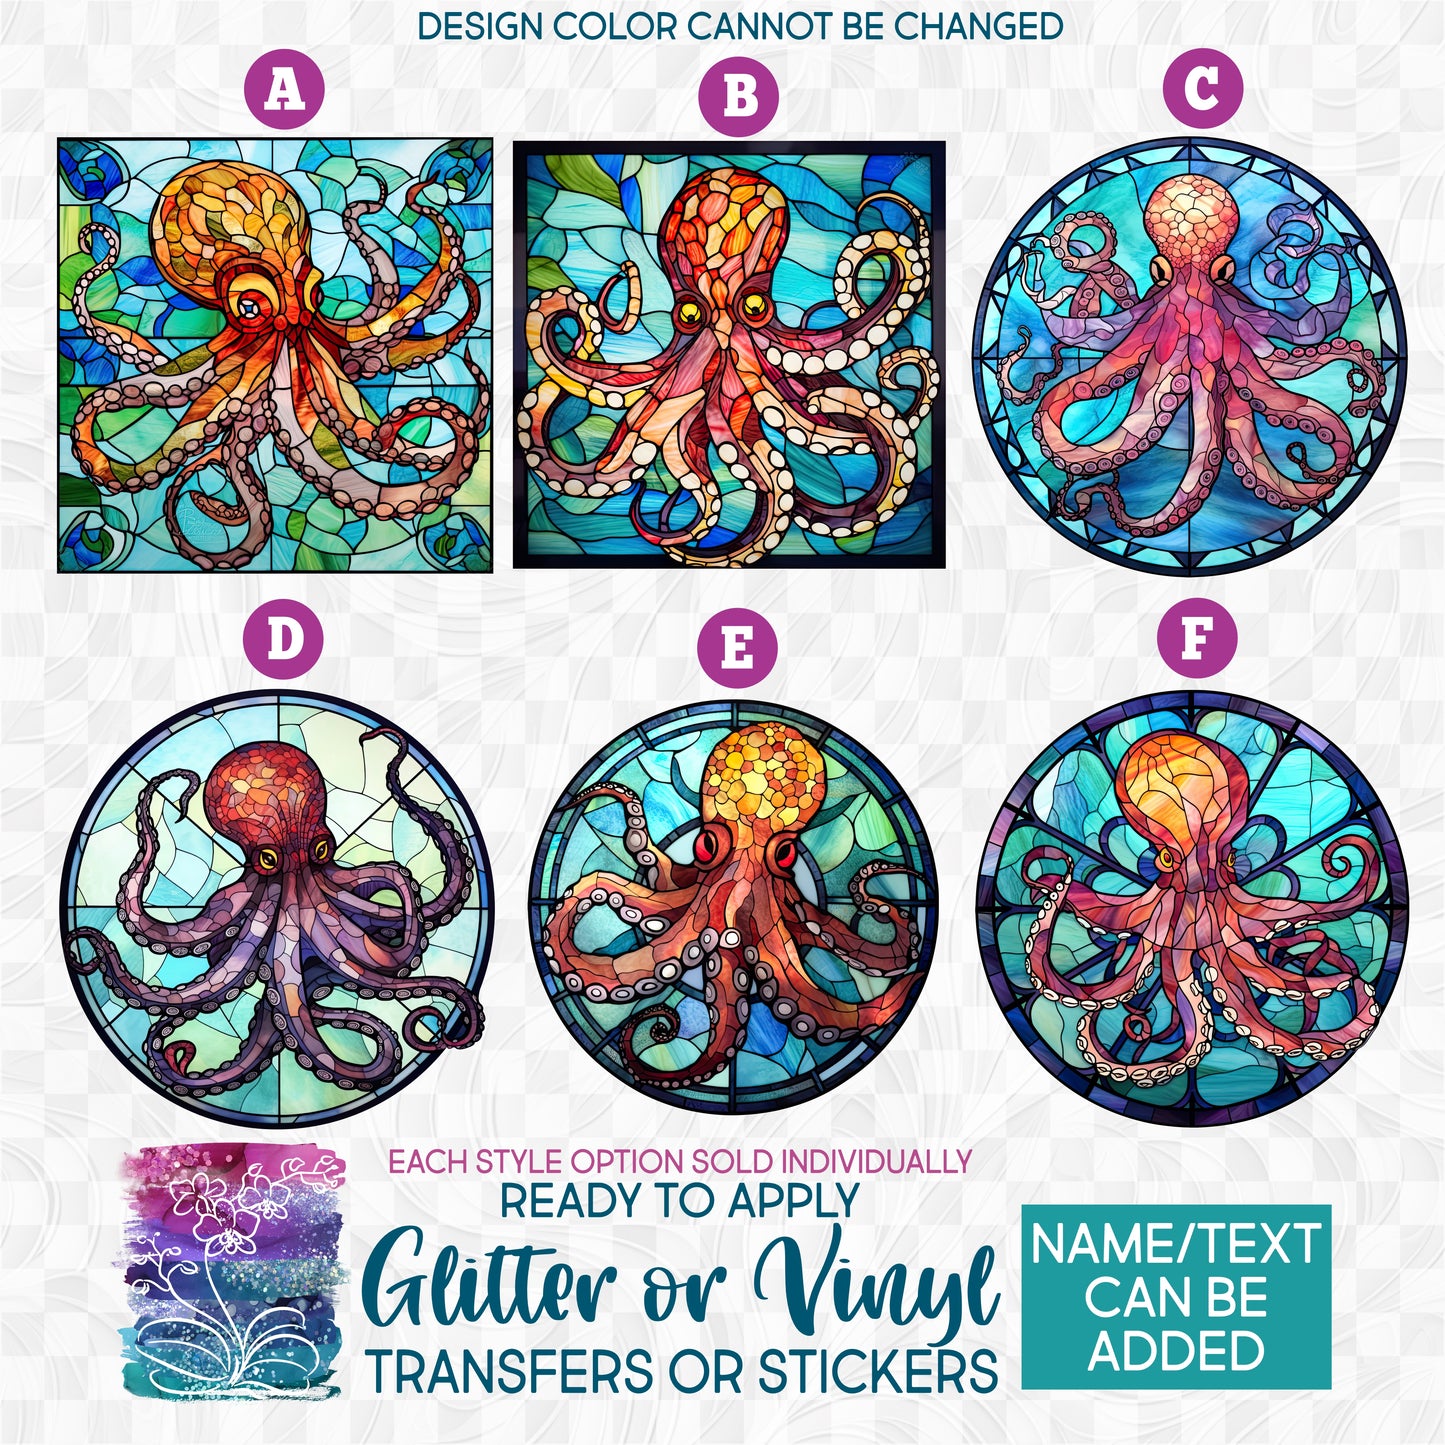 (s150-25) Stained-Glass Octopus Octopi Glitter or Vinyl Iron-On Transfer or Sticker